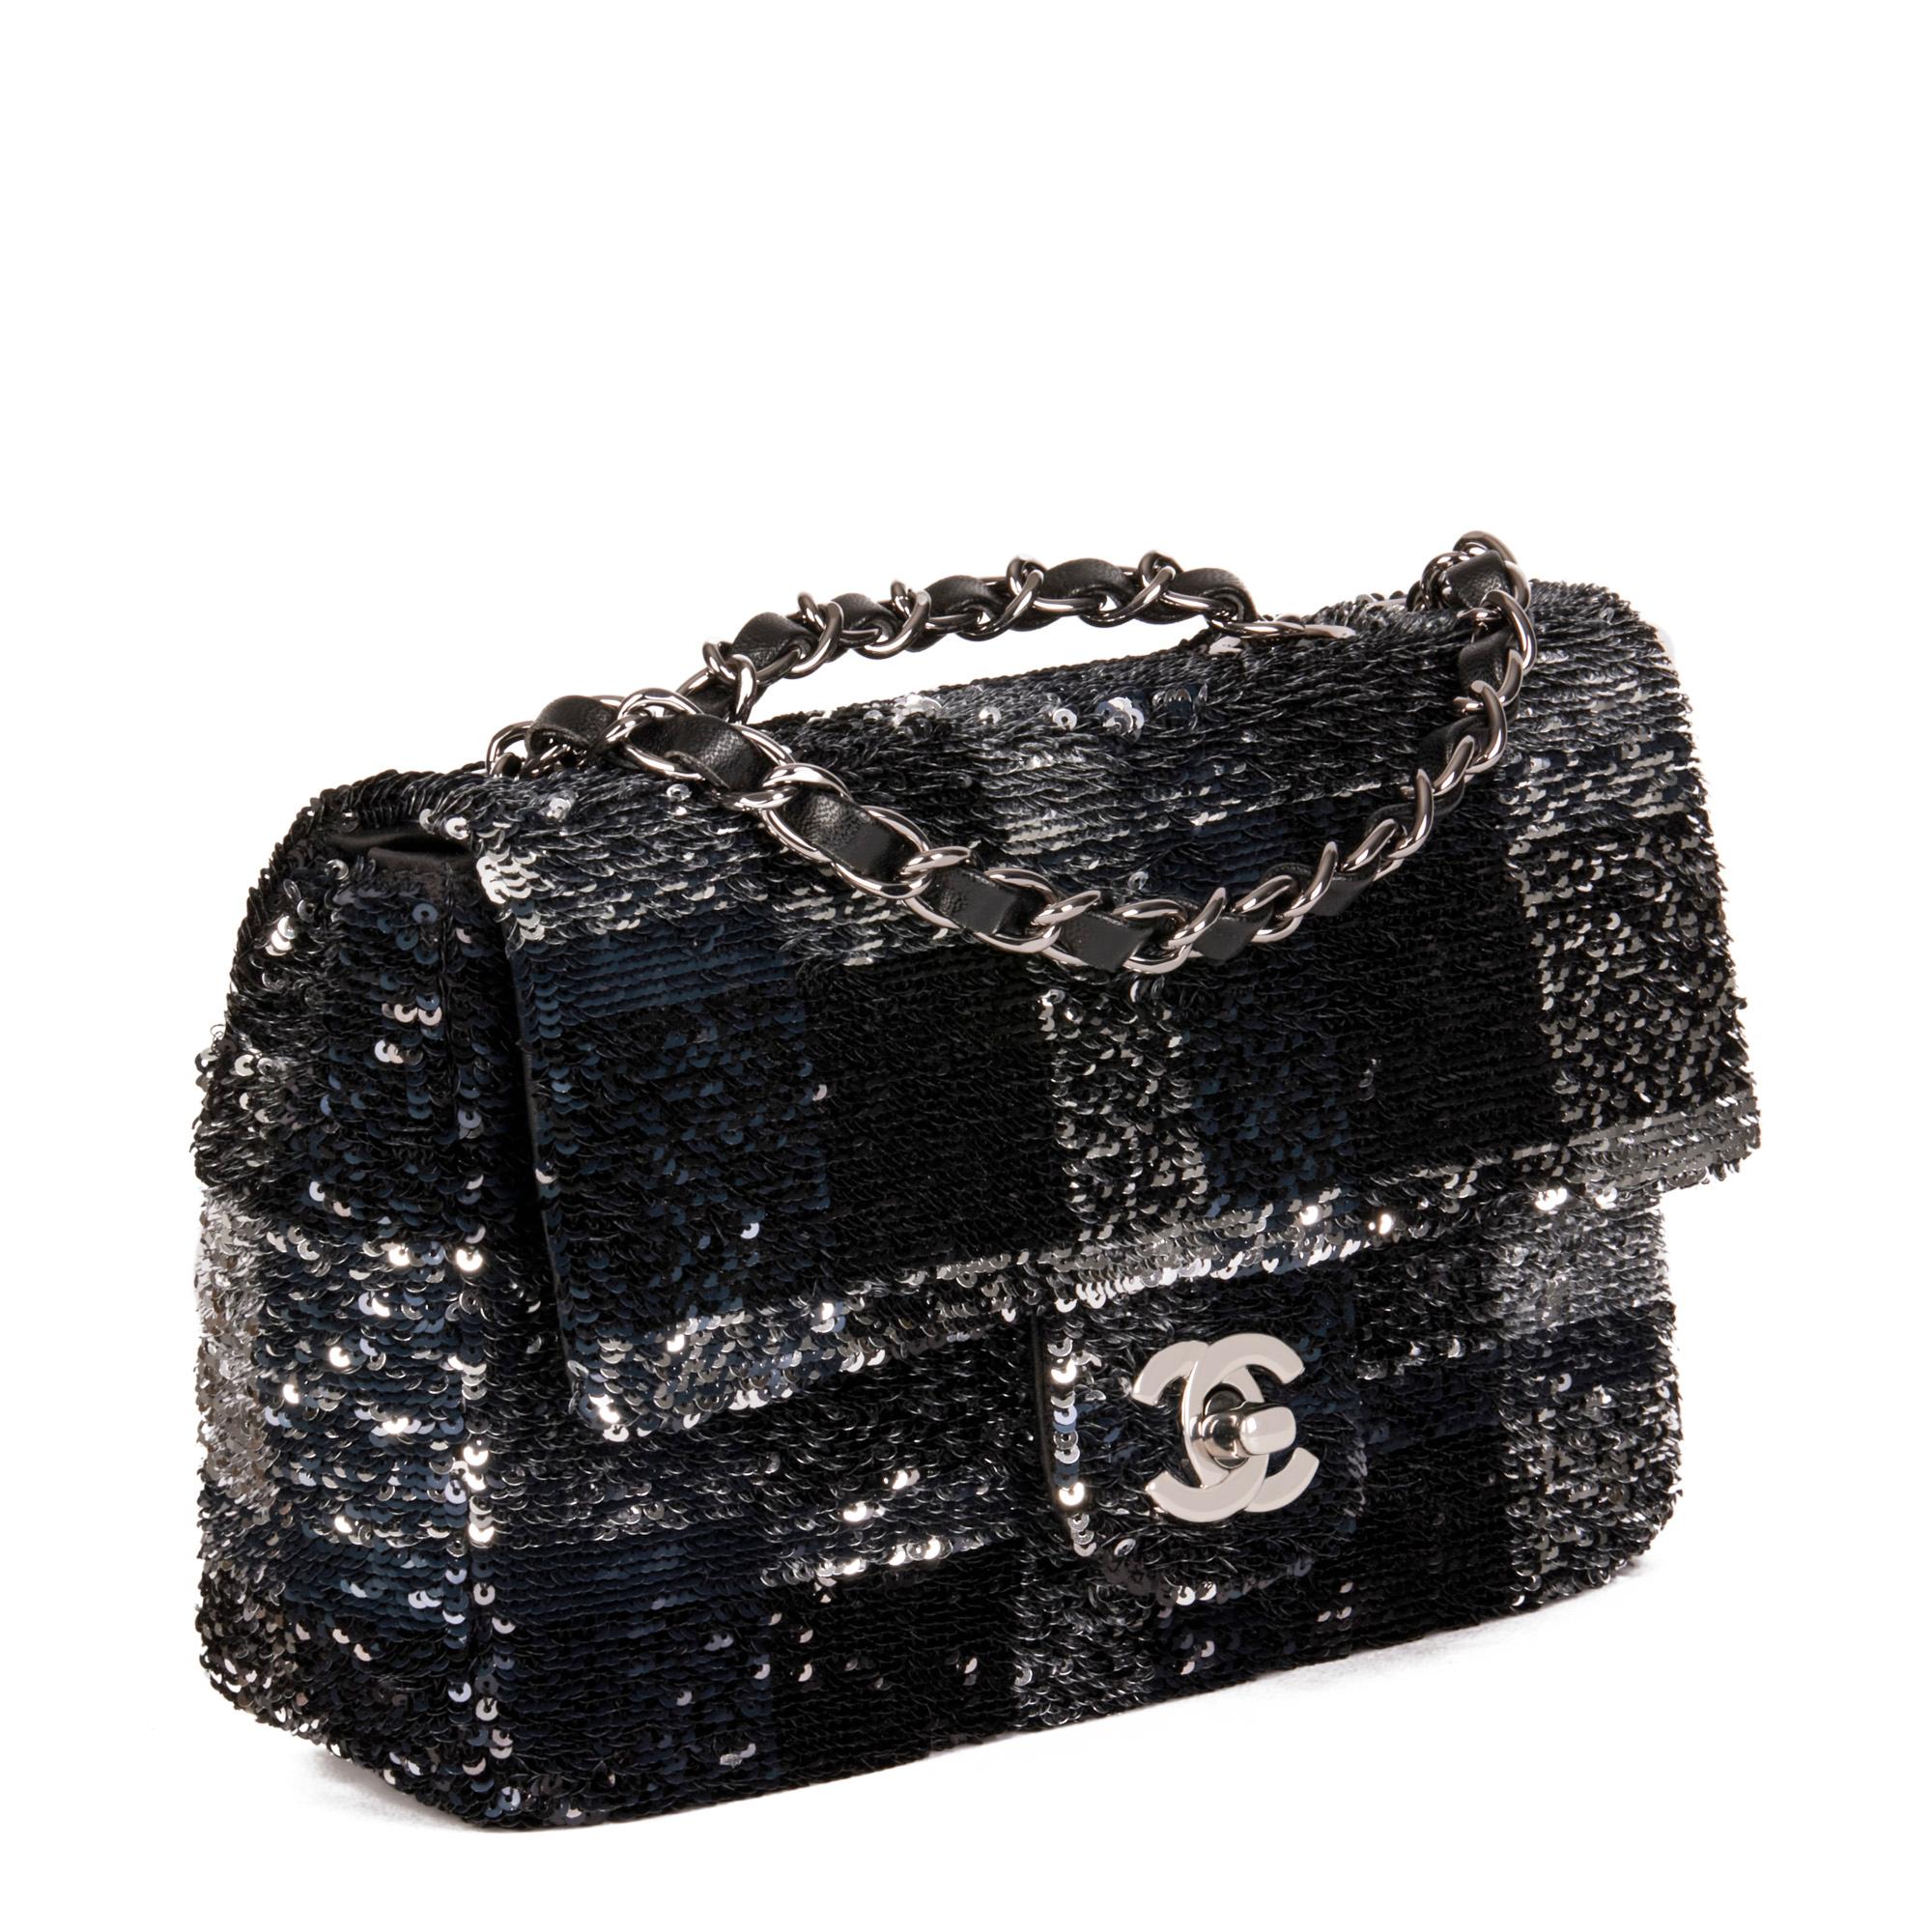 CHANEL
Black & Silver Sequin Rectangular Mini Flap Bag

Xupes Reference: CB563
Serial Number: 27533883
Age (Circa): 2019
Authenticity Details: Serial Sticker (Made in Italy)
Gender: Ladies
Type: Shoulder

Colour: Black, Silver
Hardware: